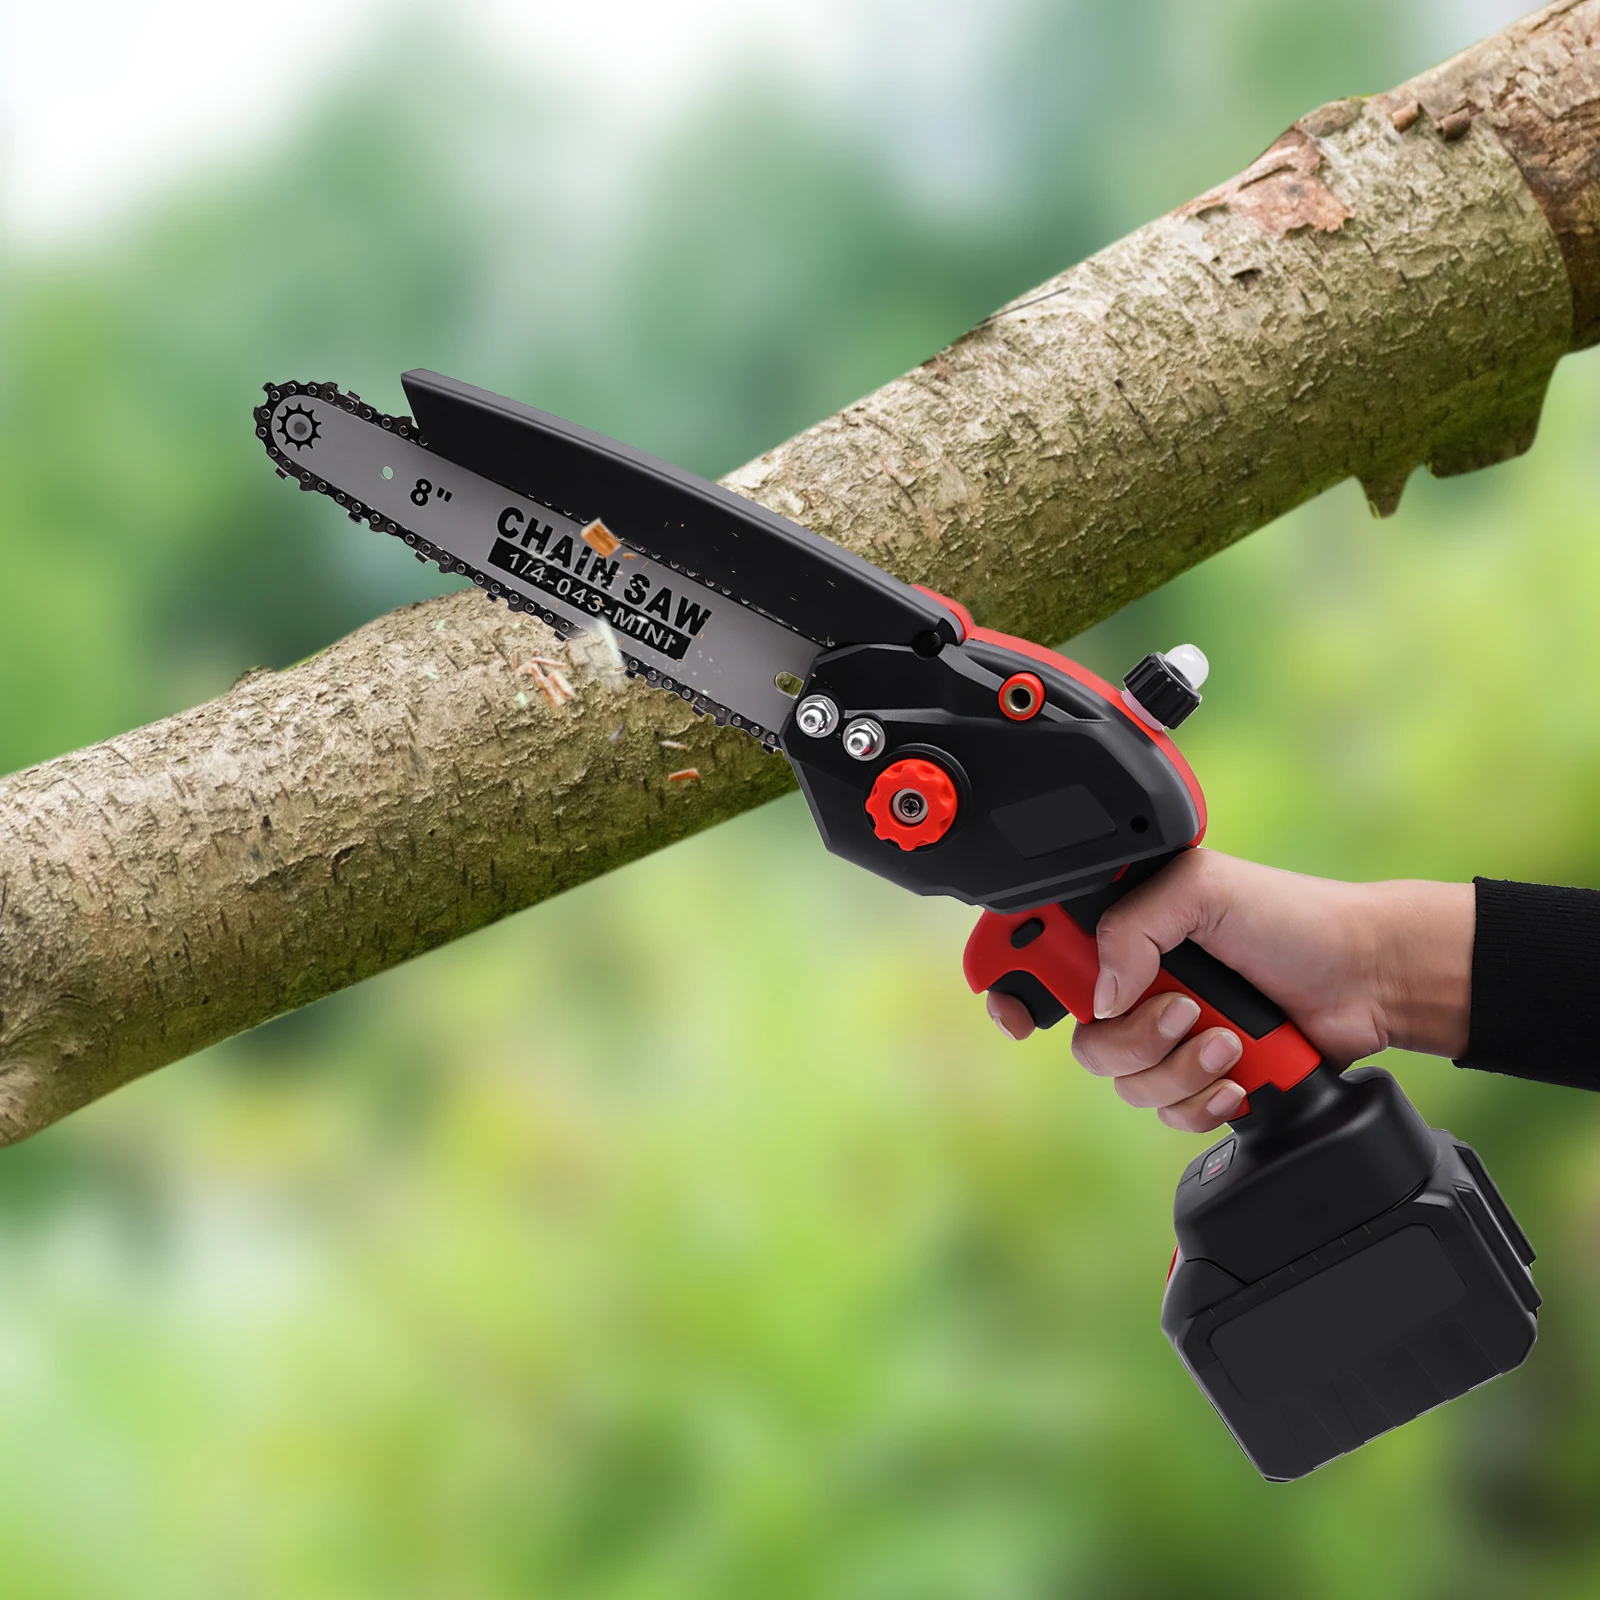 

Brushless Mini Chainsaw 8 inch Electric Cordless Chainsaw with Battery Powered and Fast Charger Included, Auto-Oil System